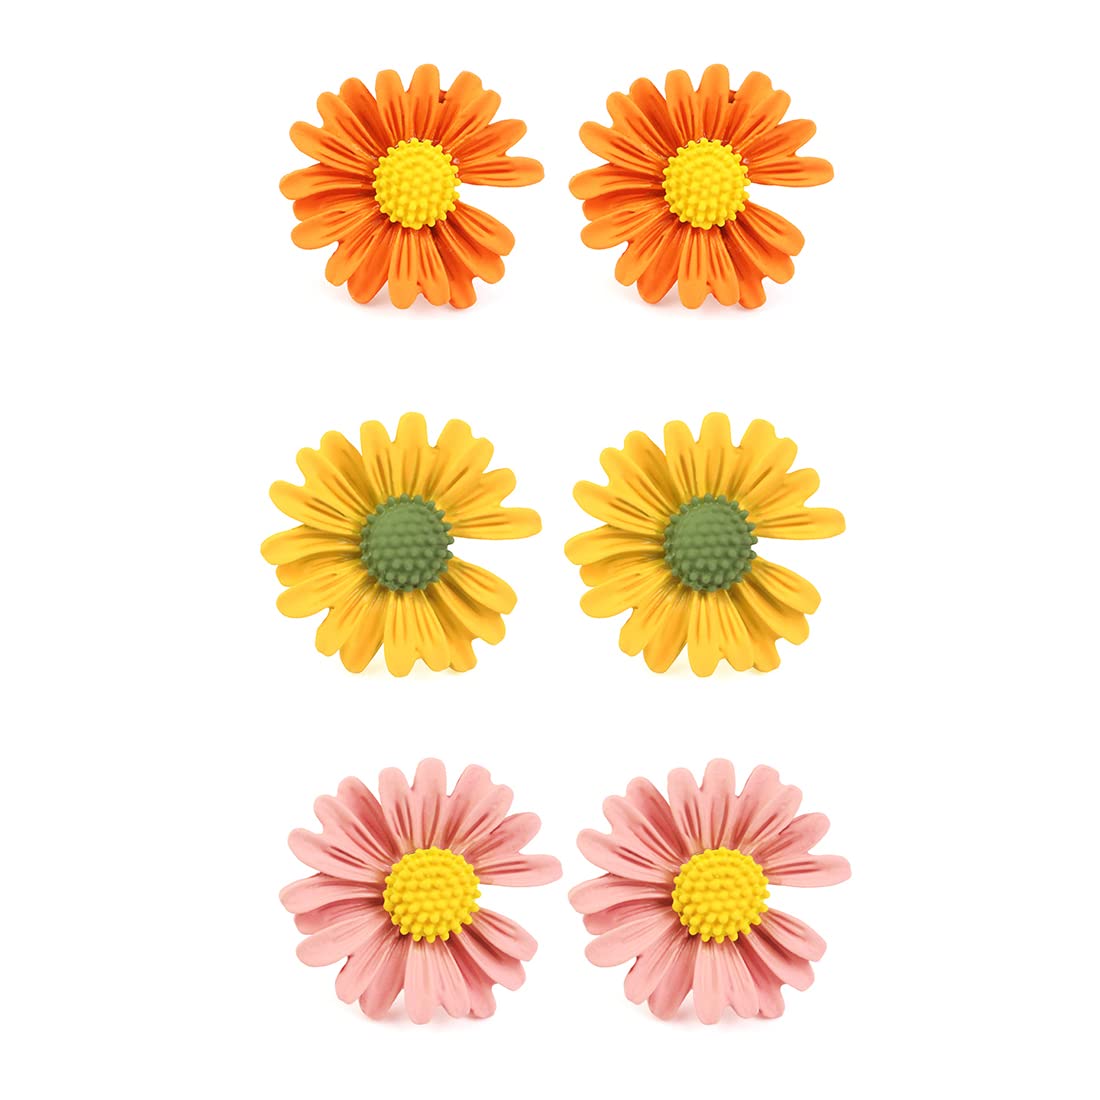 Yellow Chimes Stud Earrings for Women Combo of 3 Pairs Multicolor Floral Stud Earrings fow Women and Girl's.